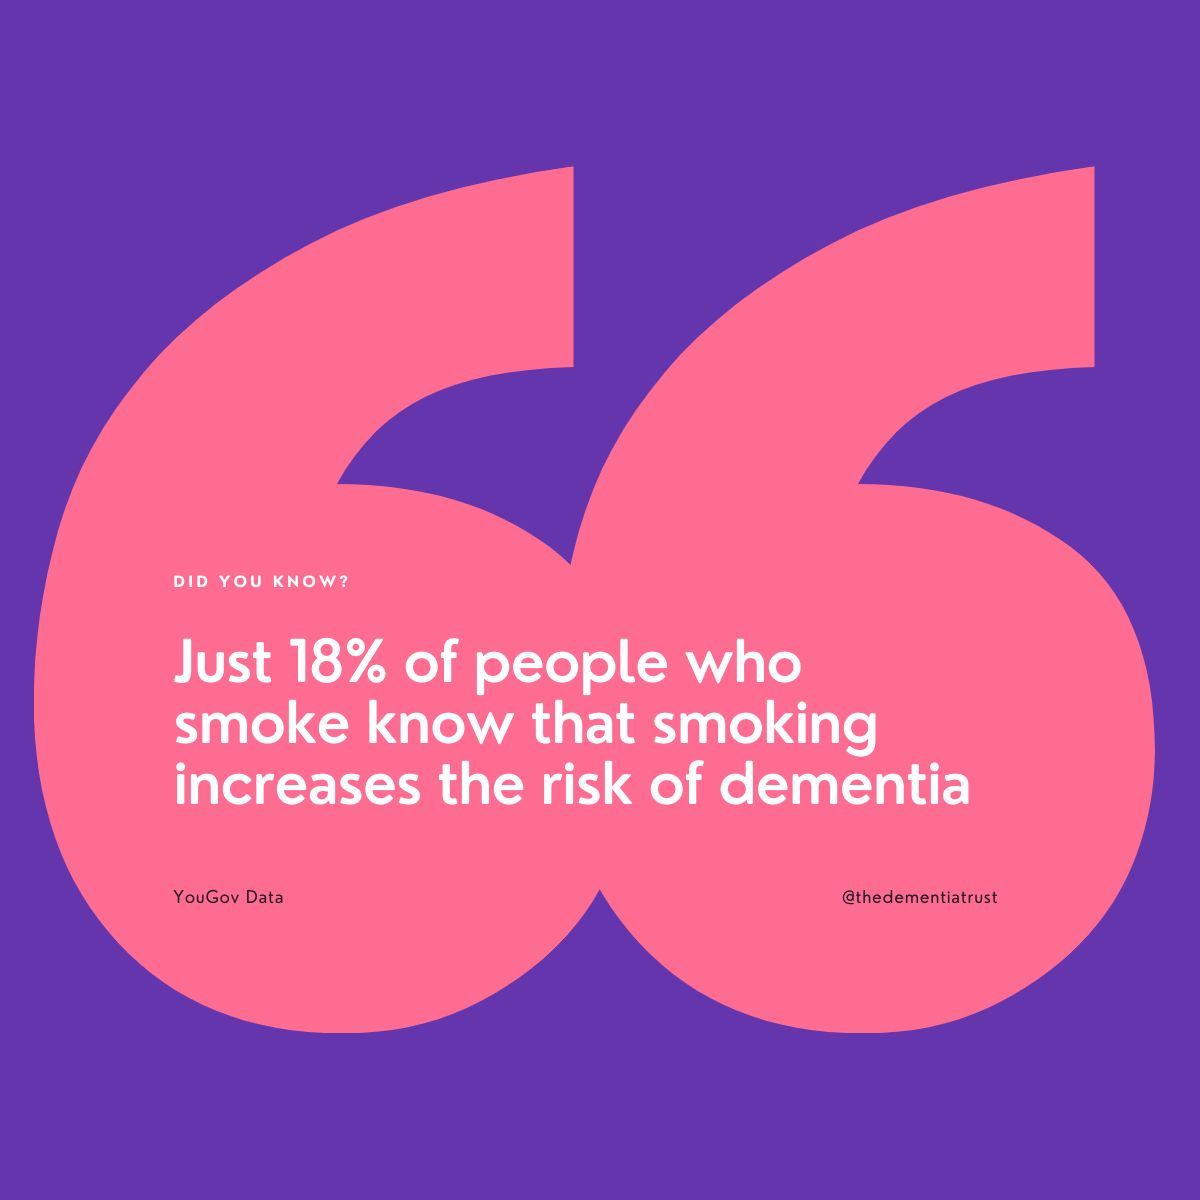 Did you know? 🤓 Just 18% of people who smoke knew that smoking increases dementia risk, compared to more than 70% who knew that smoking causes lung diseases or cancers, according to @YouGov data commissioned by @ashorguk #DementiaAwareness